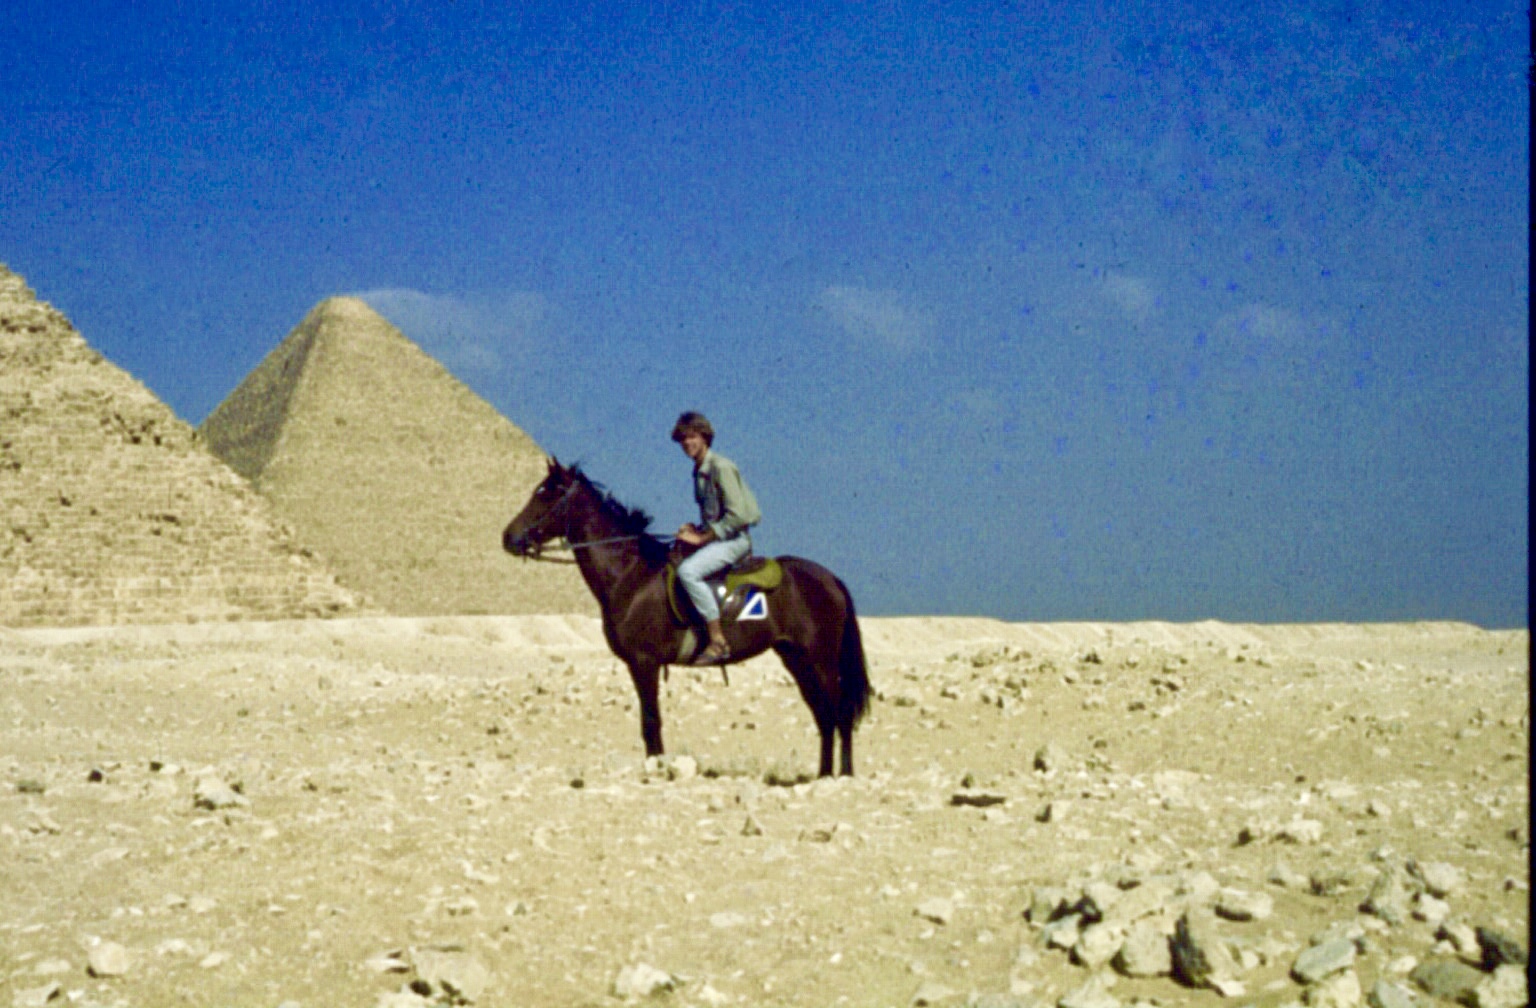 Mike on horse near pyramids